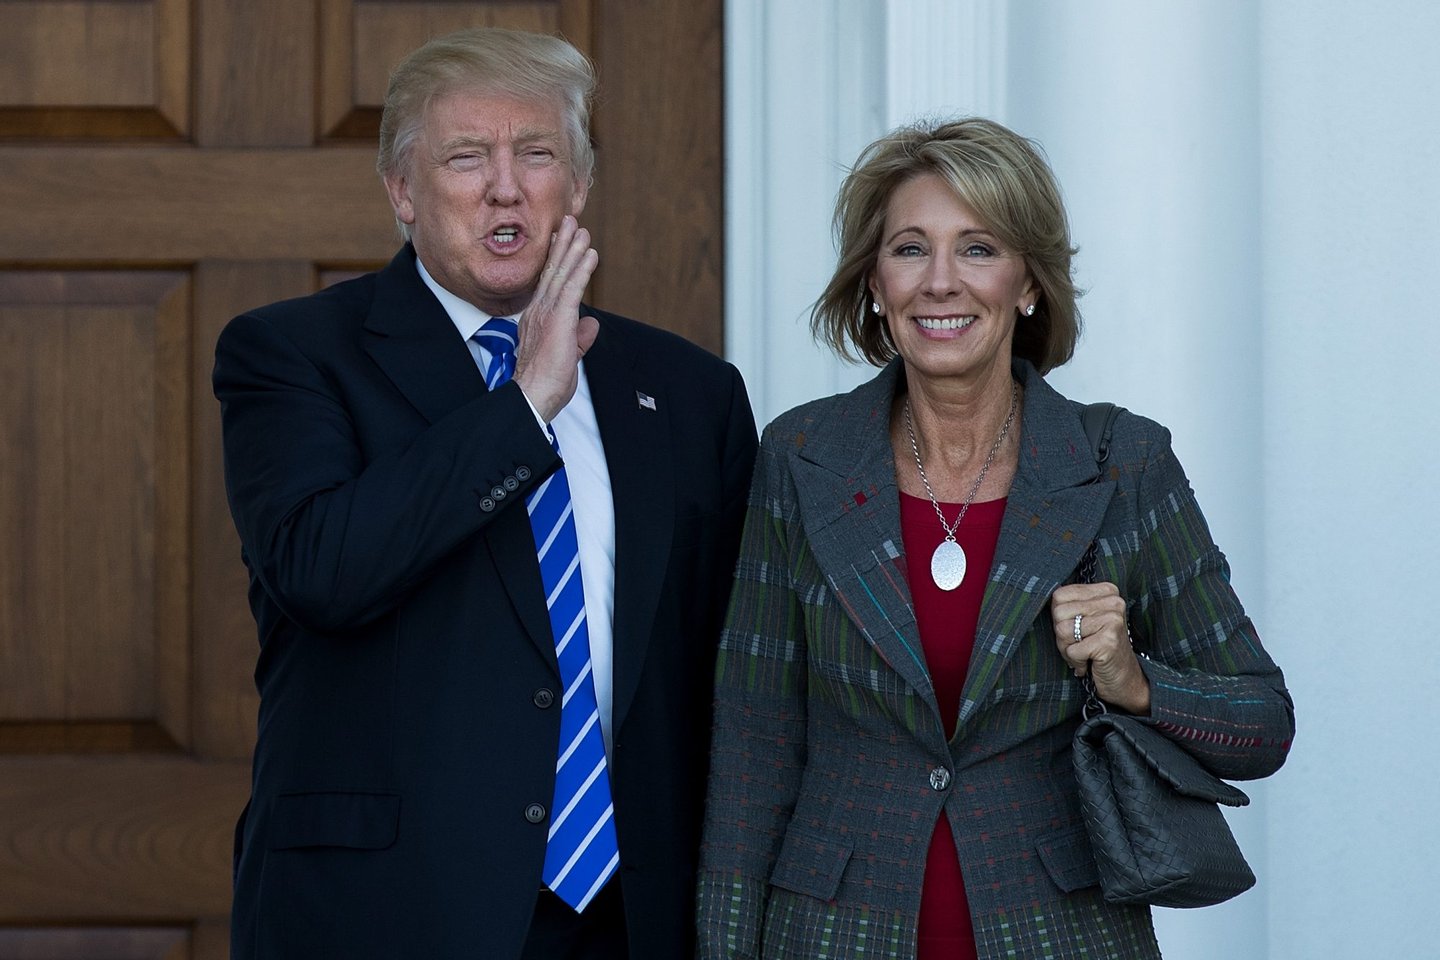 BEDMINSTER TOWNSHIP, NJ - NOVEMBER 19: (L to R) president-elect Donald Trump and Betsy DeVos pose for a photo after their meeting at Trump International Golf Club, November 19, 2016 in Bedminster Township, New Jersey. Trump and his transition team are in the process of filling cabinet and other high level positions for the new administration. (Photo by Drew Angerer/Getty Images)